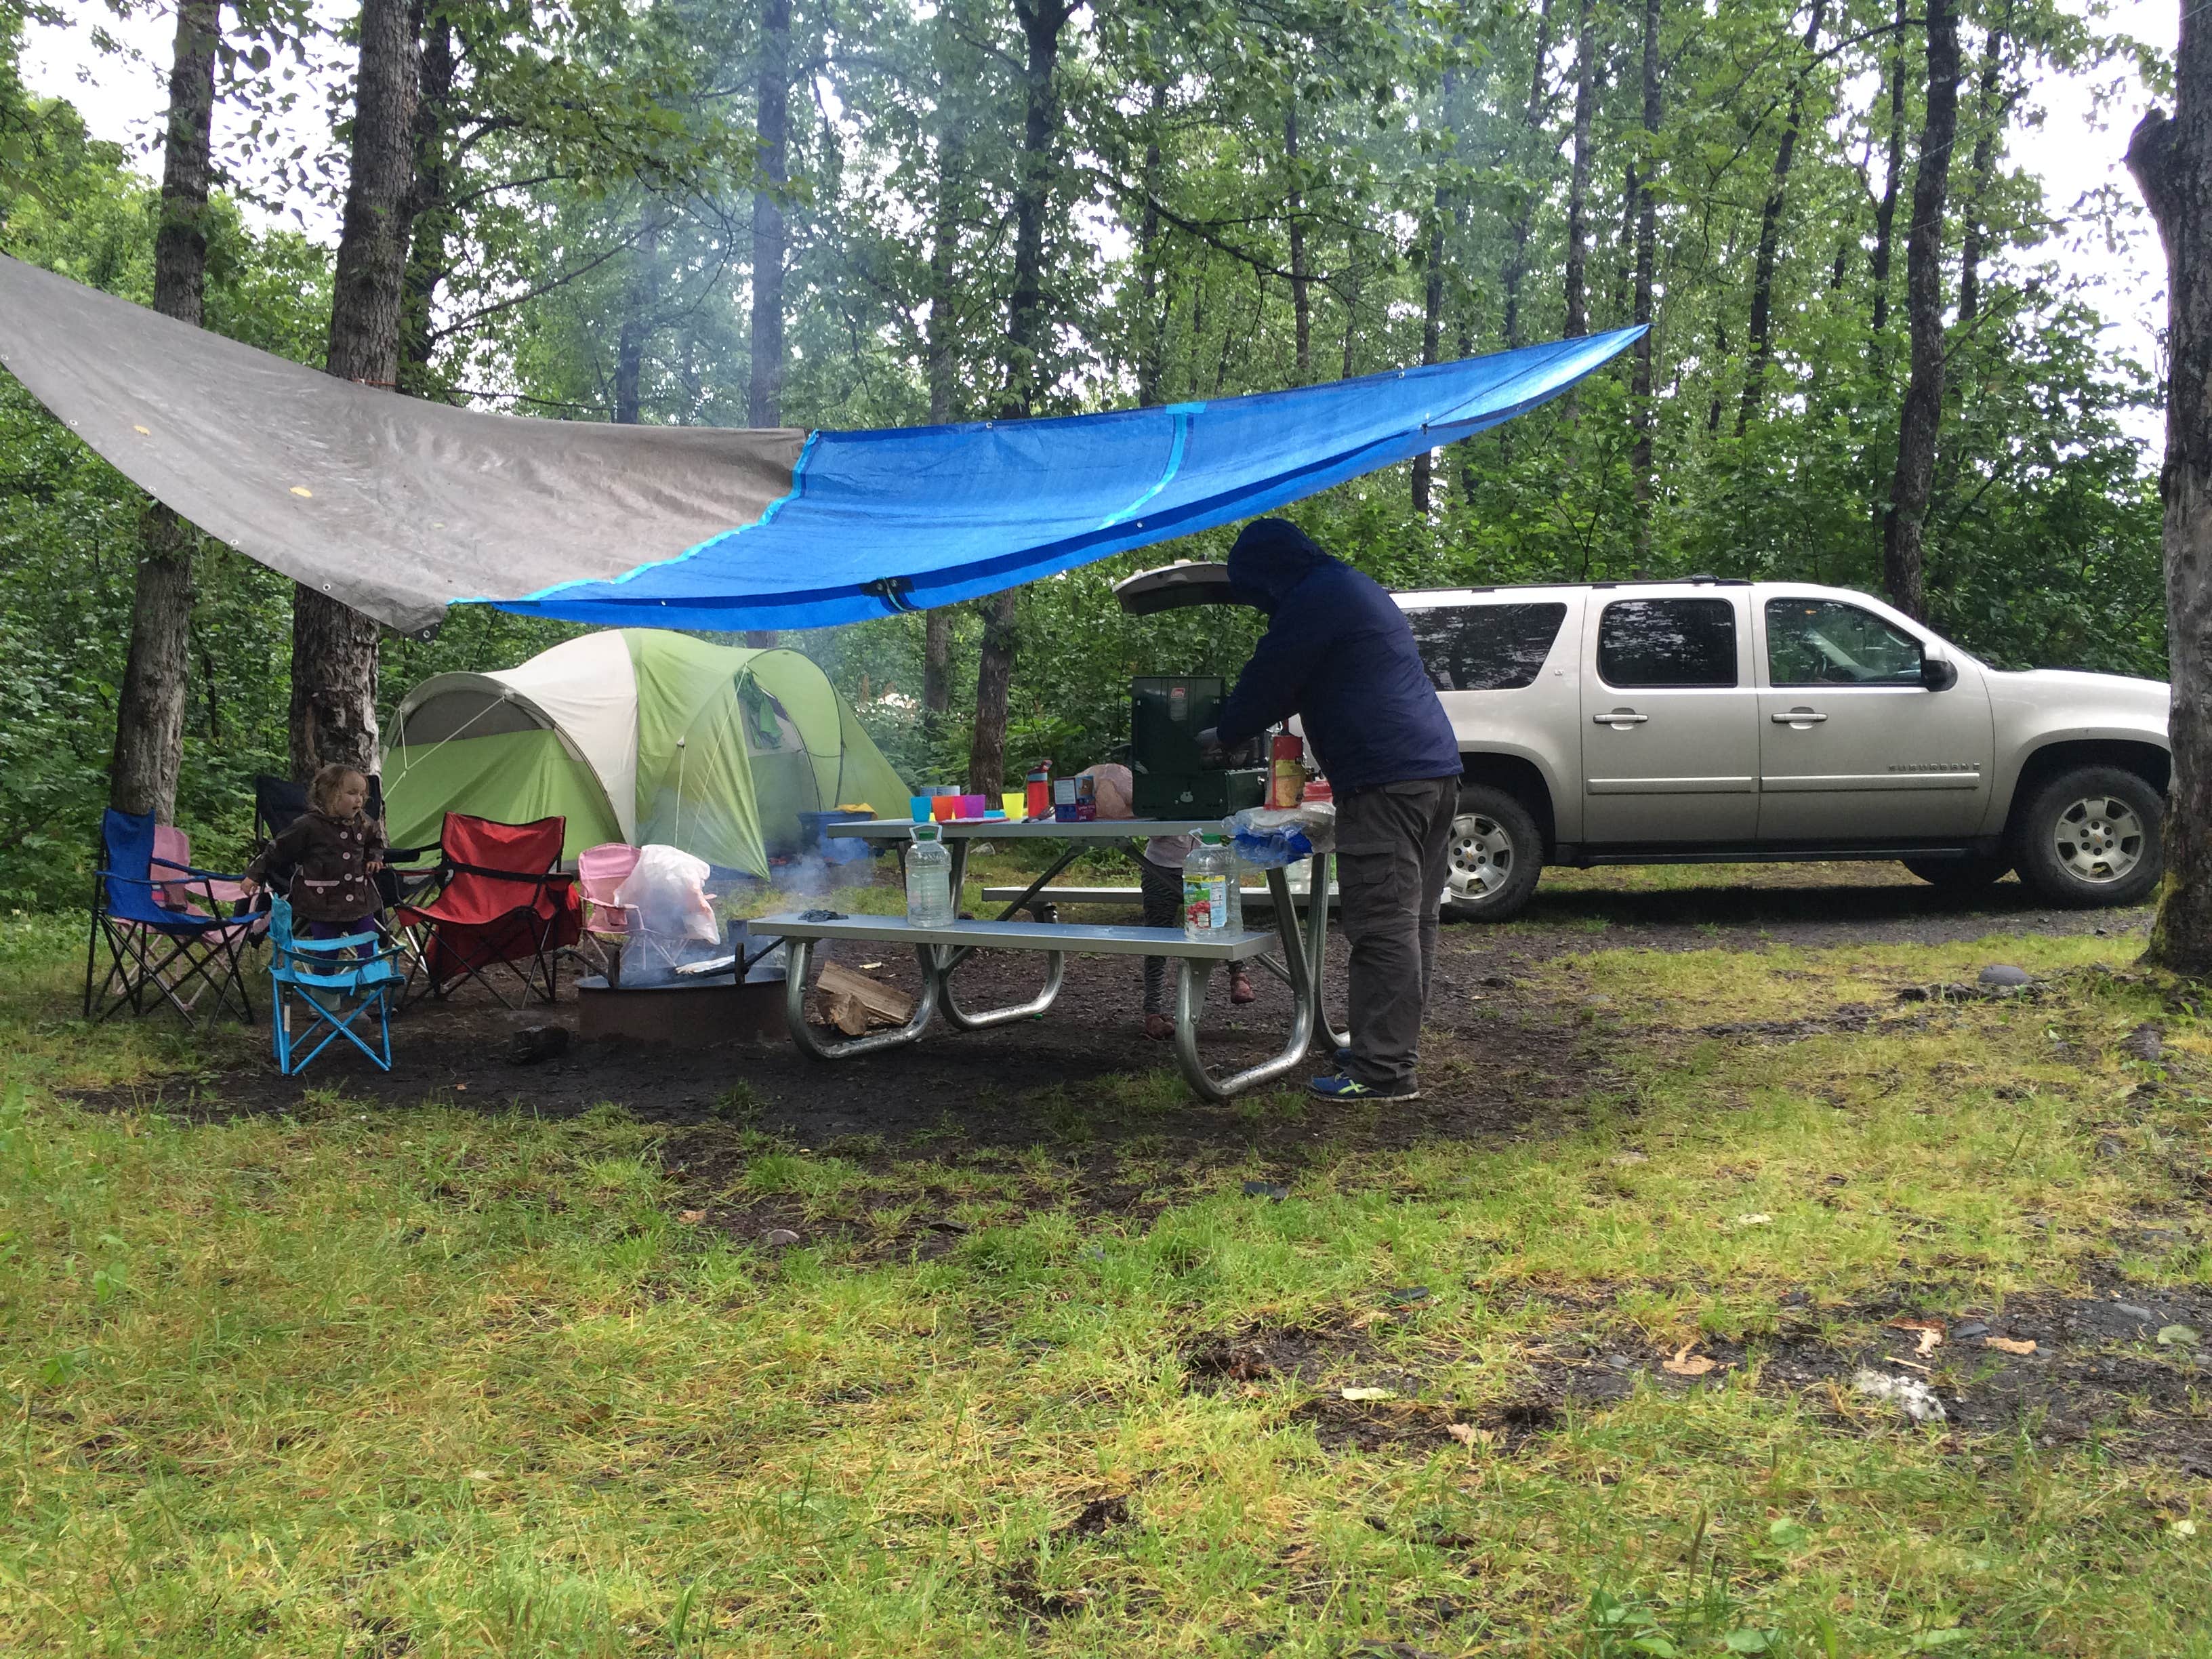 Sometimes it is a bit rainy in Valdez and tarps come in handy.